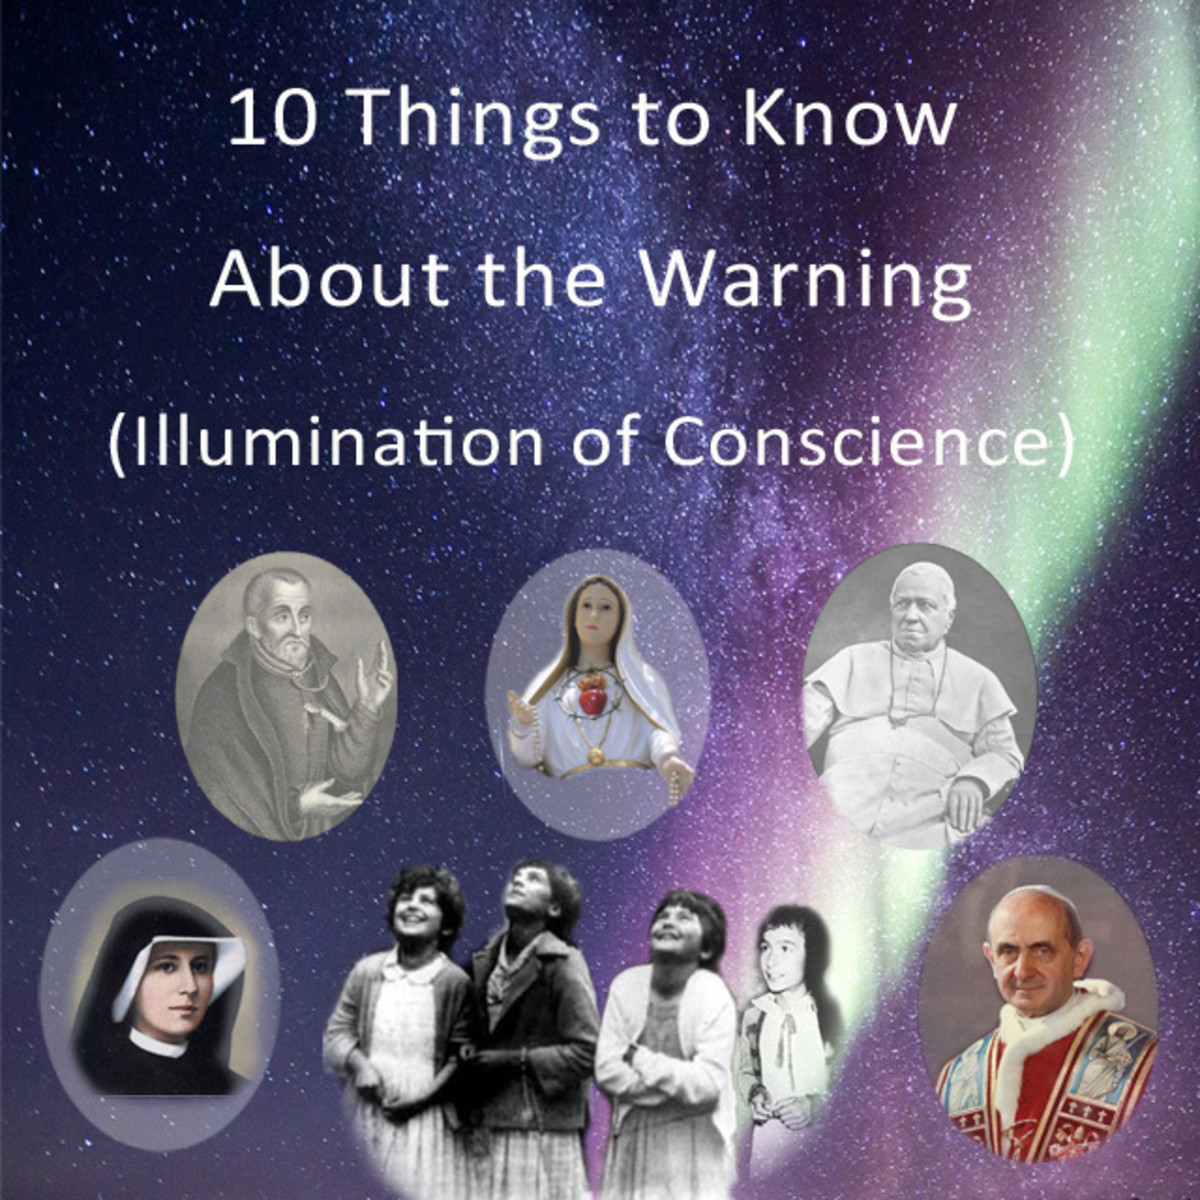 Mystics across the ages have predicted an event known as the Warning. Read on to discover its significance.